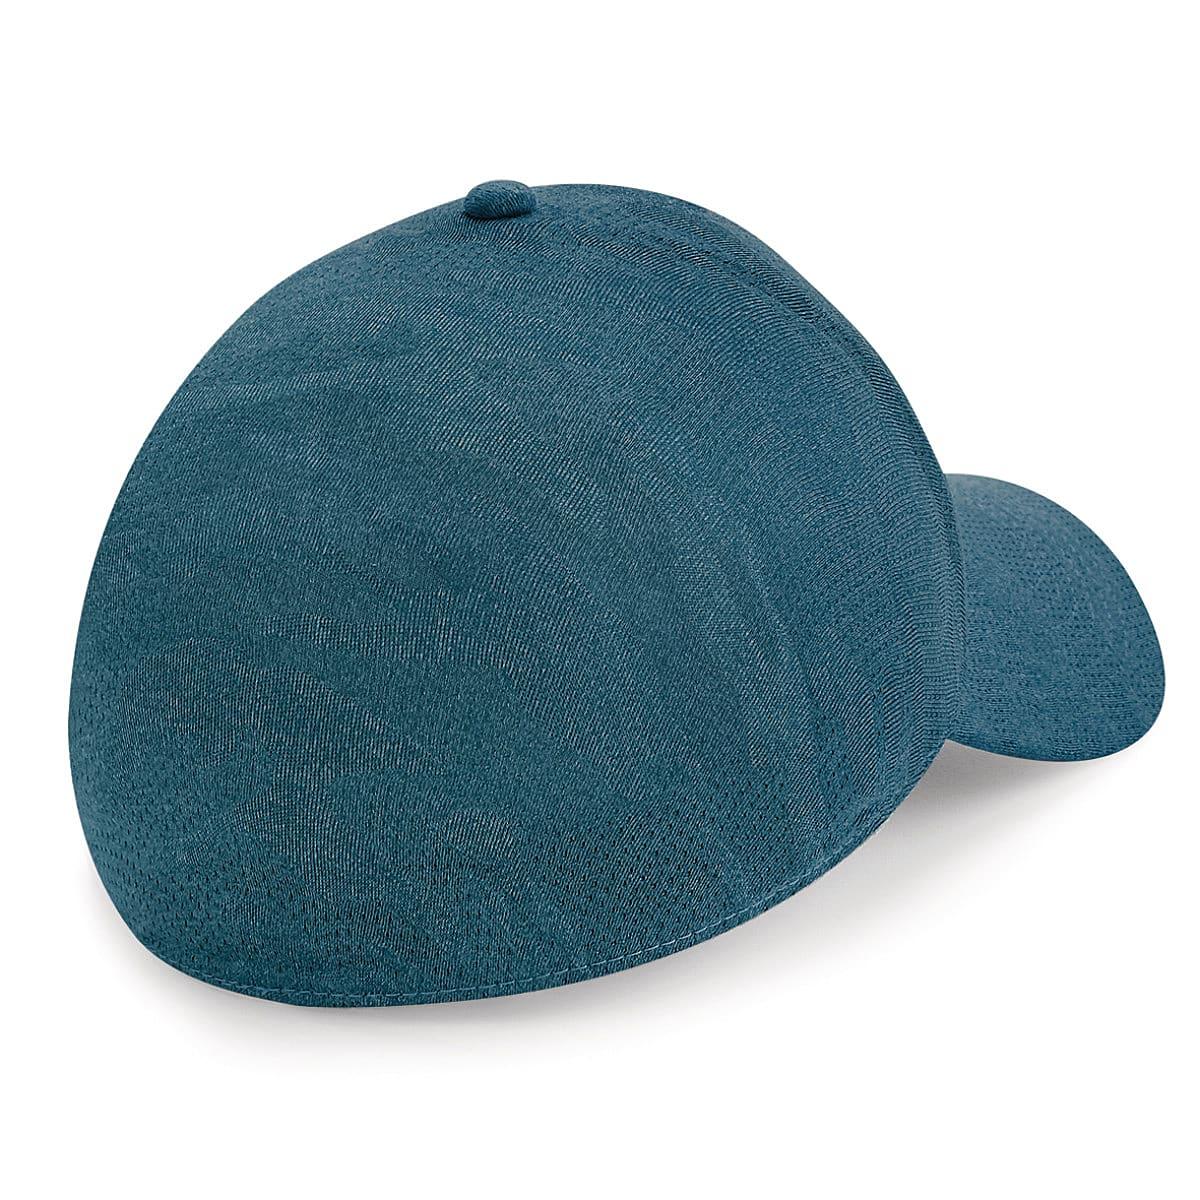 Beechfield Seamless Performance Cap in Antique Teal (Product Code: B558)